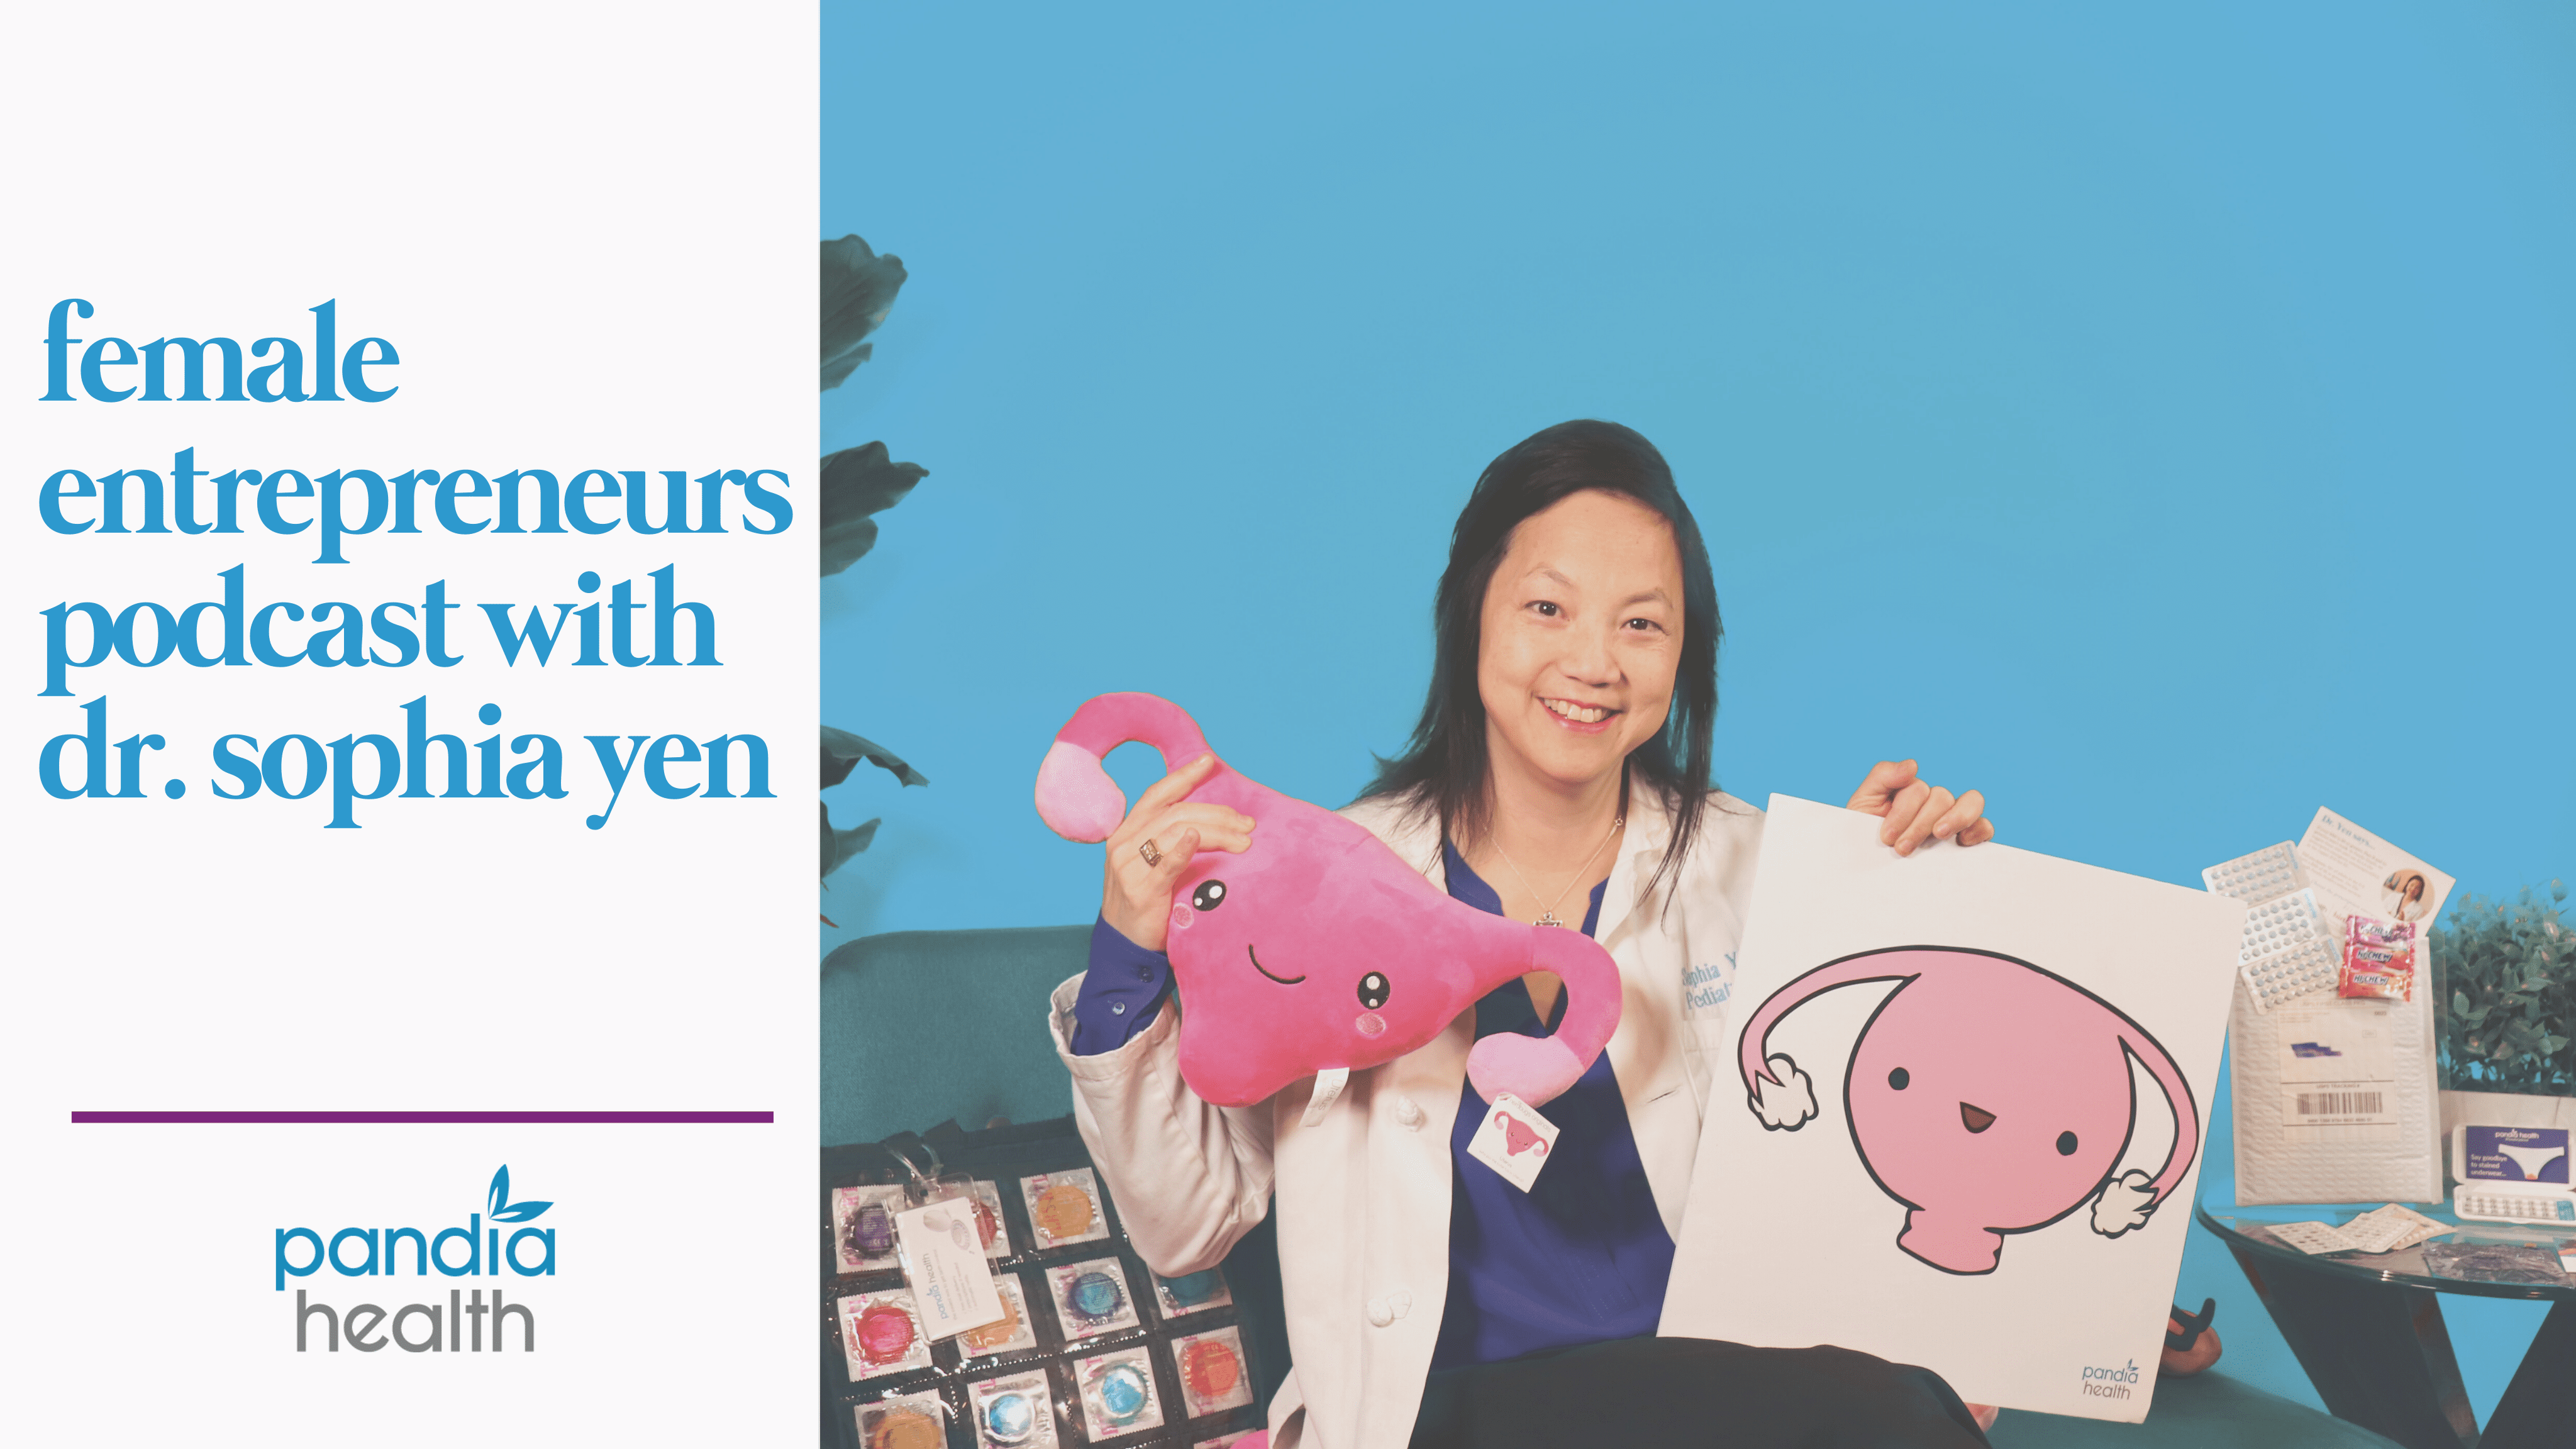 dr. sophia yen holding a pink uterus stuffed animal in one hand and white shirt with uterus on it in the other hand, smiling sitting on couch, condom bag next to her, against a blue background